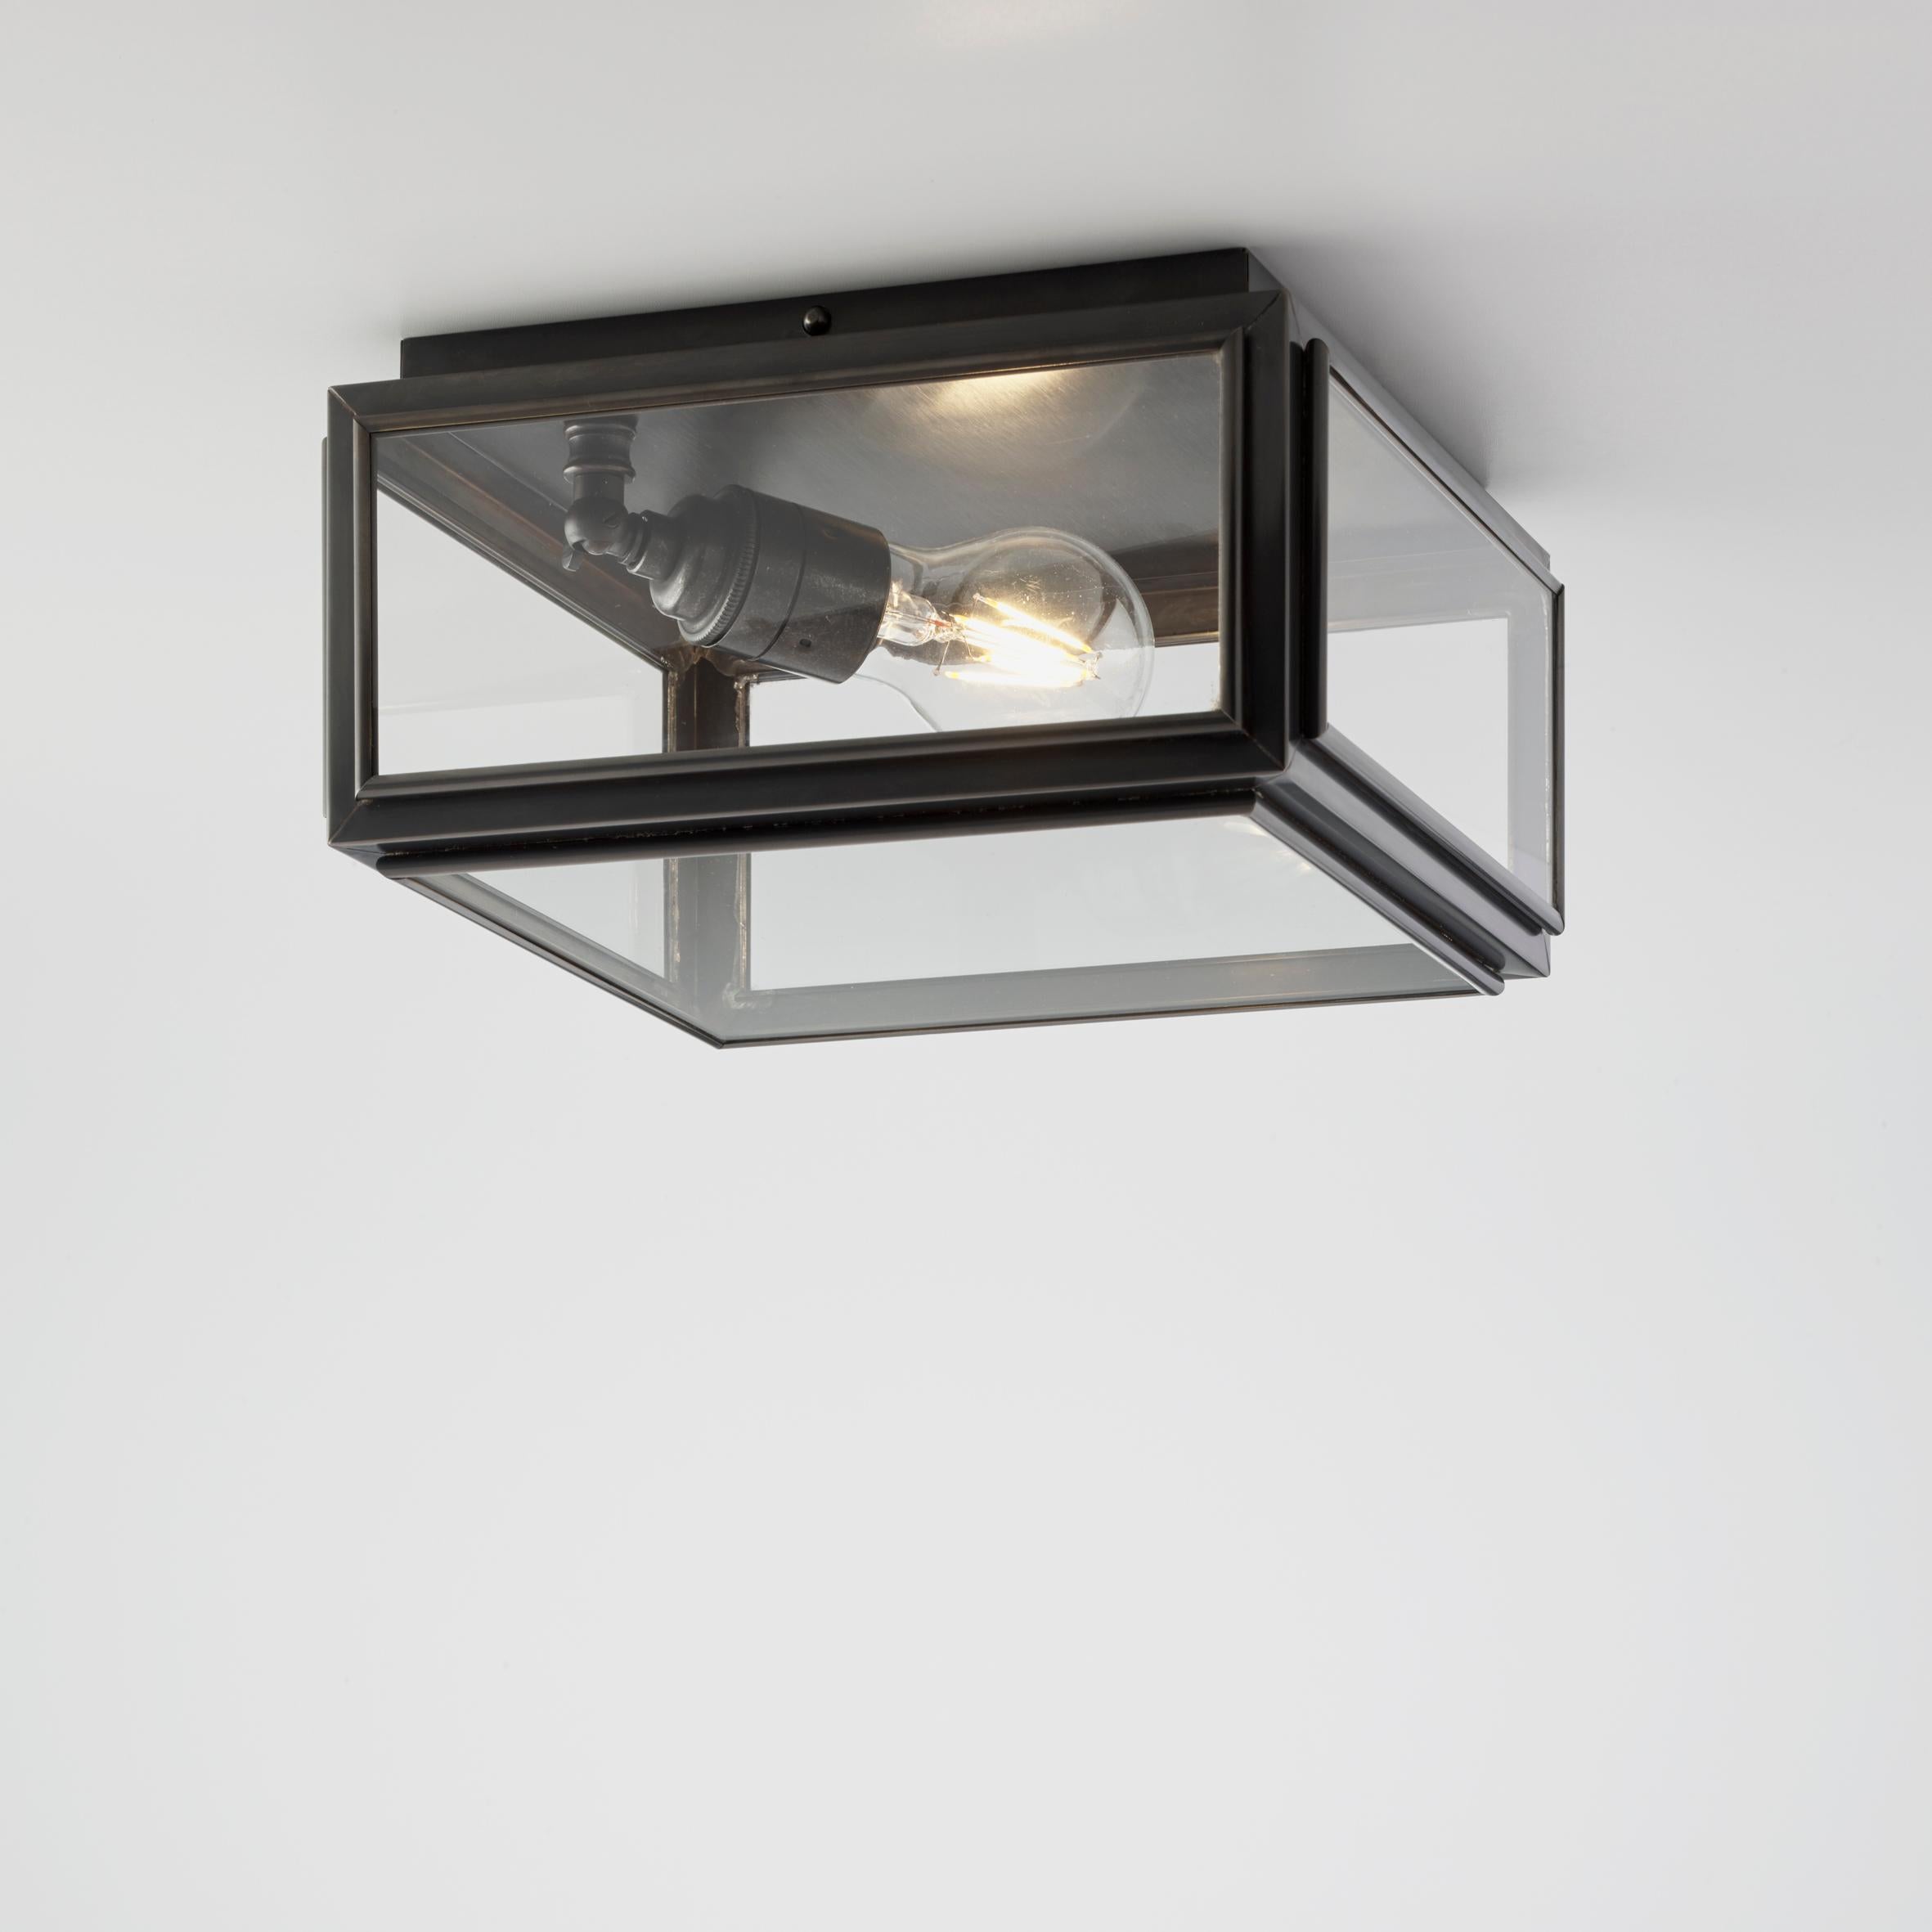 Ceiling light in brass with outside fitted clear or frosted glass and spring closure. For indoor use only (IP40).

Lamp LED E27 230V 4W 2700K Retro A60. Main power 230V 50Hz.